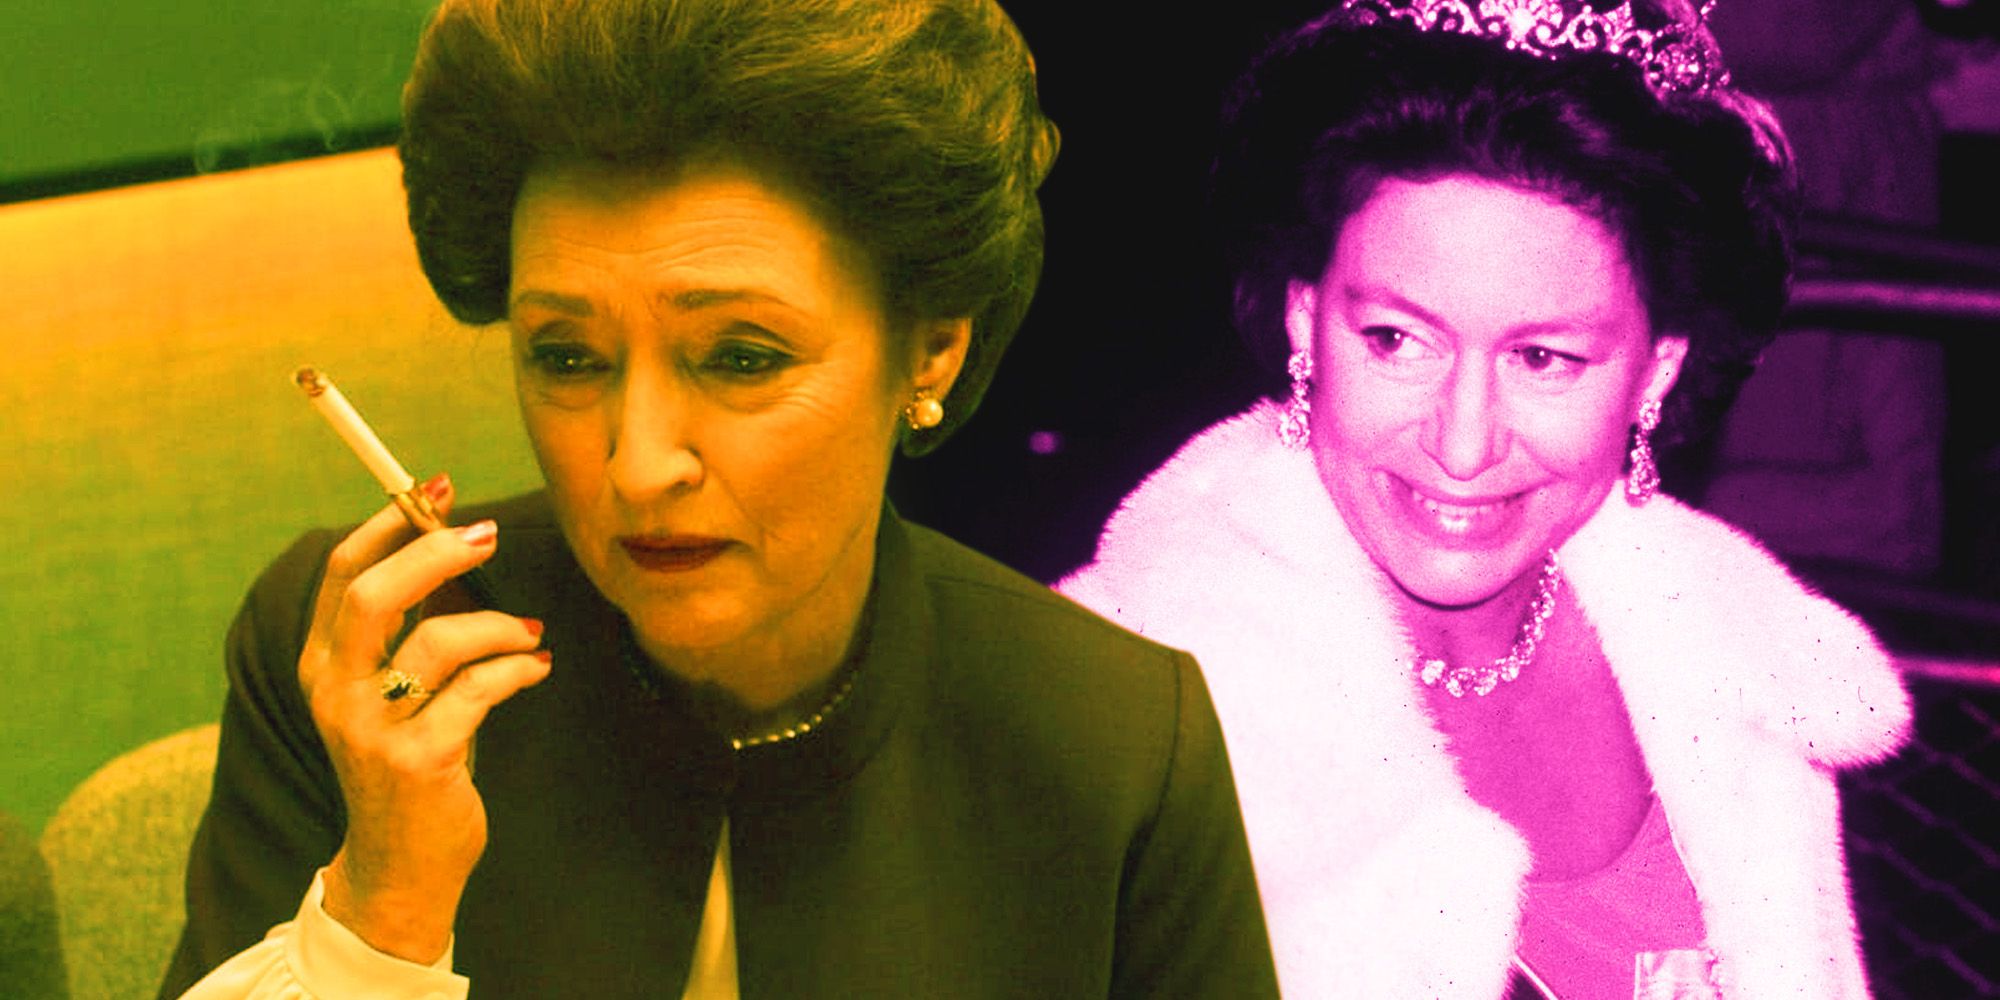 Lesley Manville as Princess Margaret in The Crown and Princess Margaret in real life.